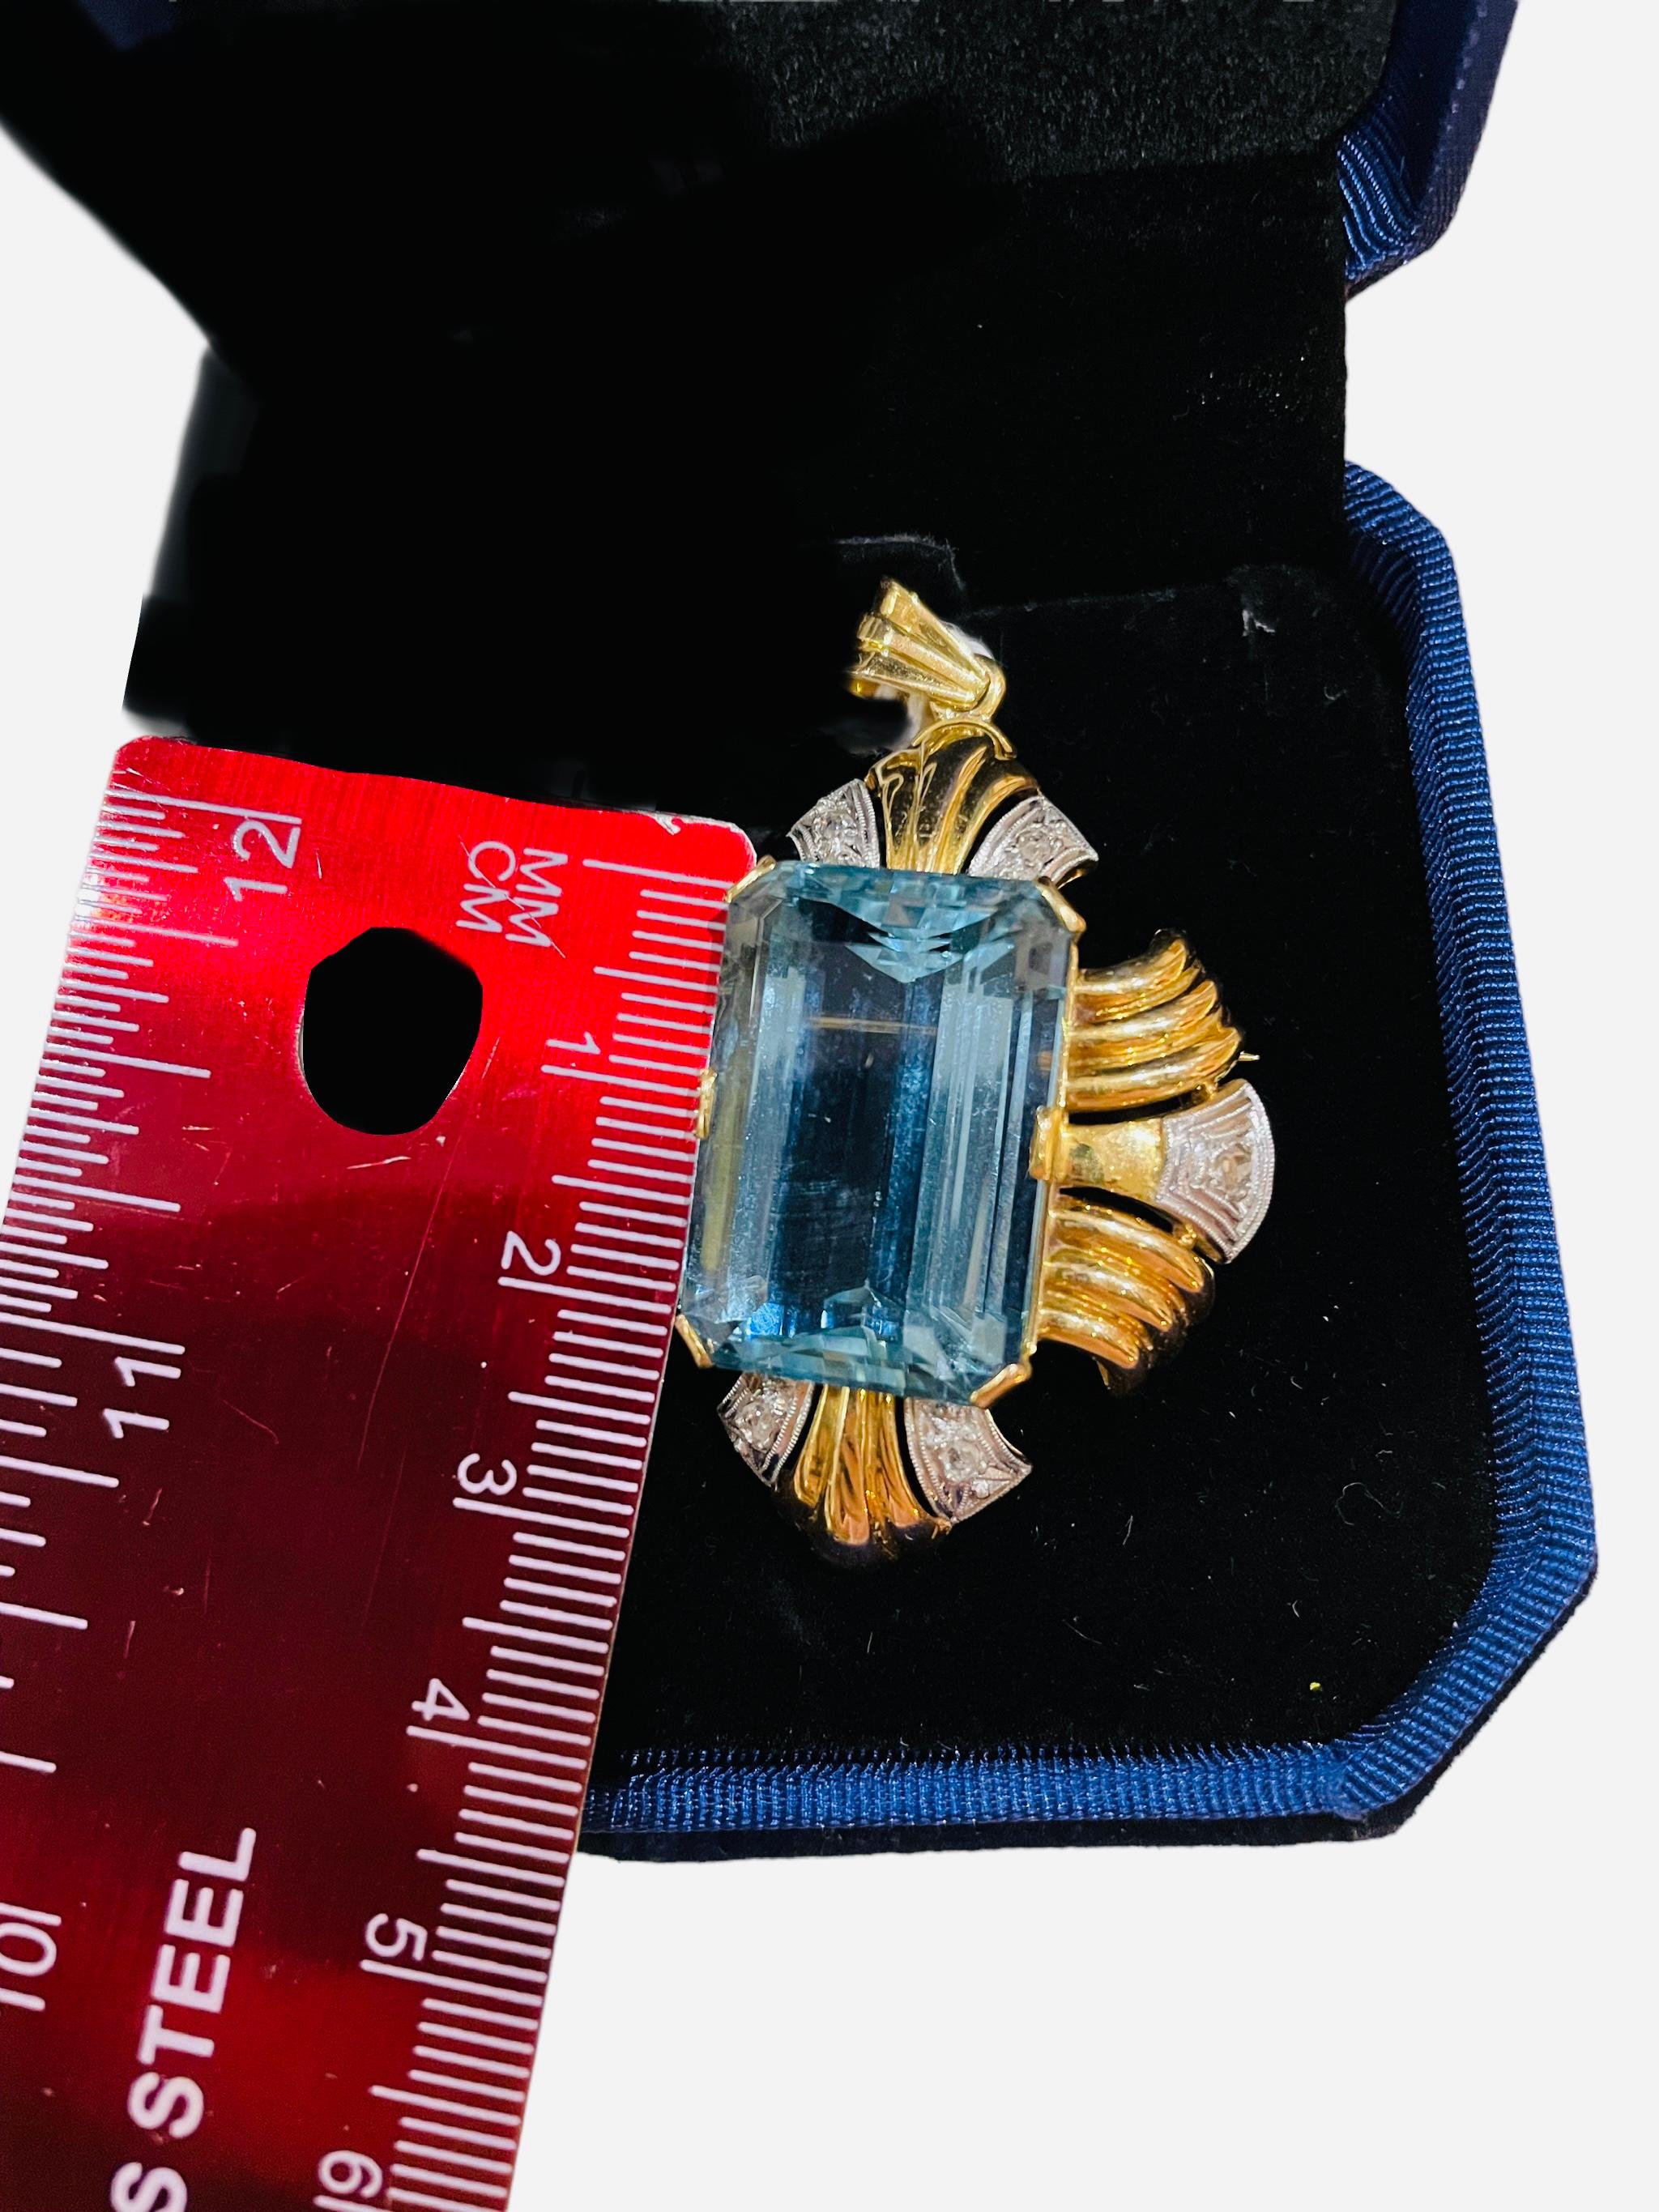 18K Gold Aquamarine And Diamonds Pendant/Brooch In Good Condition For Sale In Guaynabo, PR